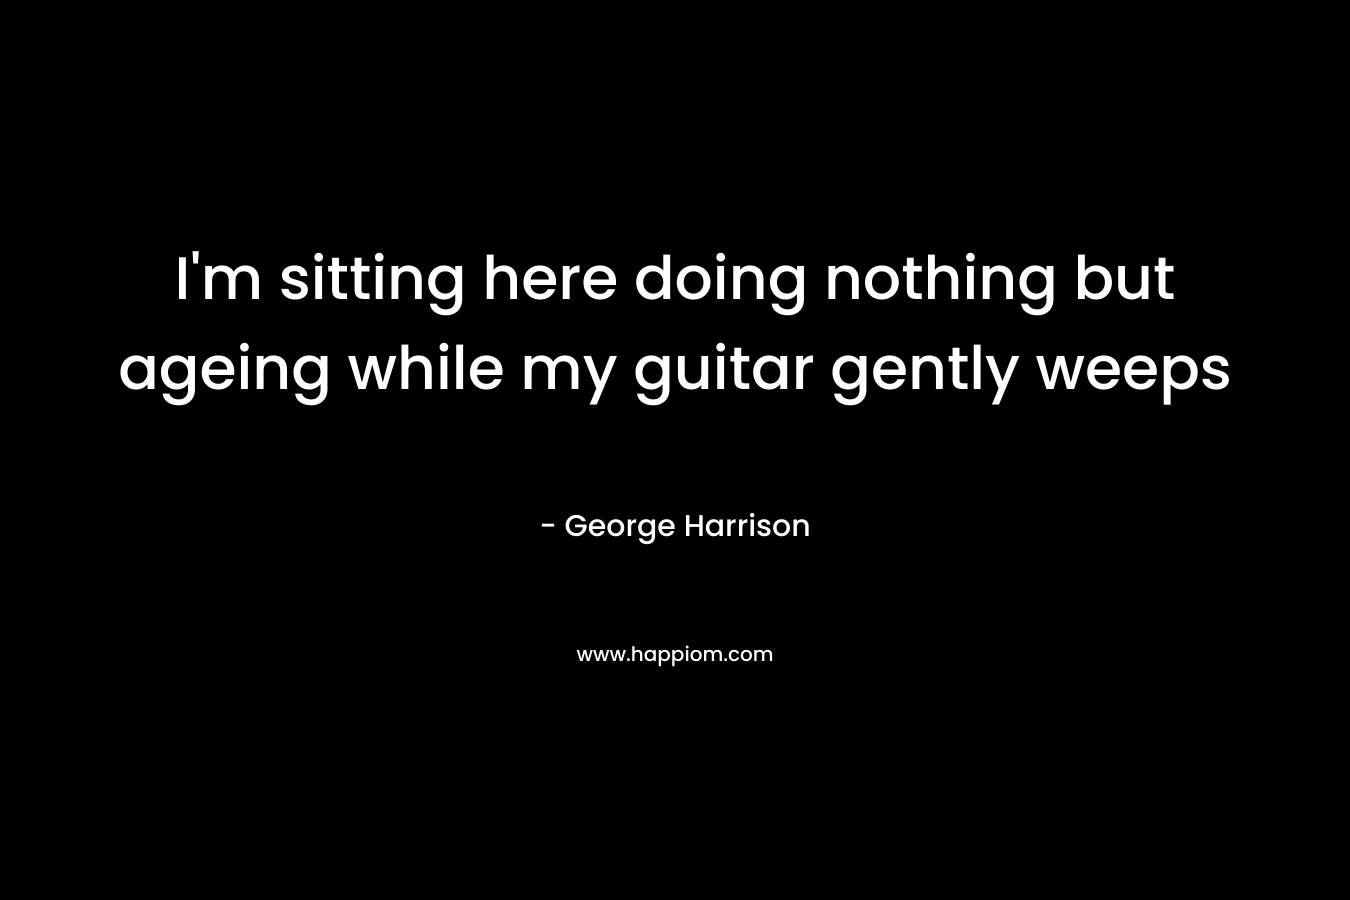 I'm sitting here doing nothing but ageing while my guitar gently weeps